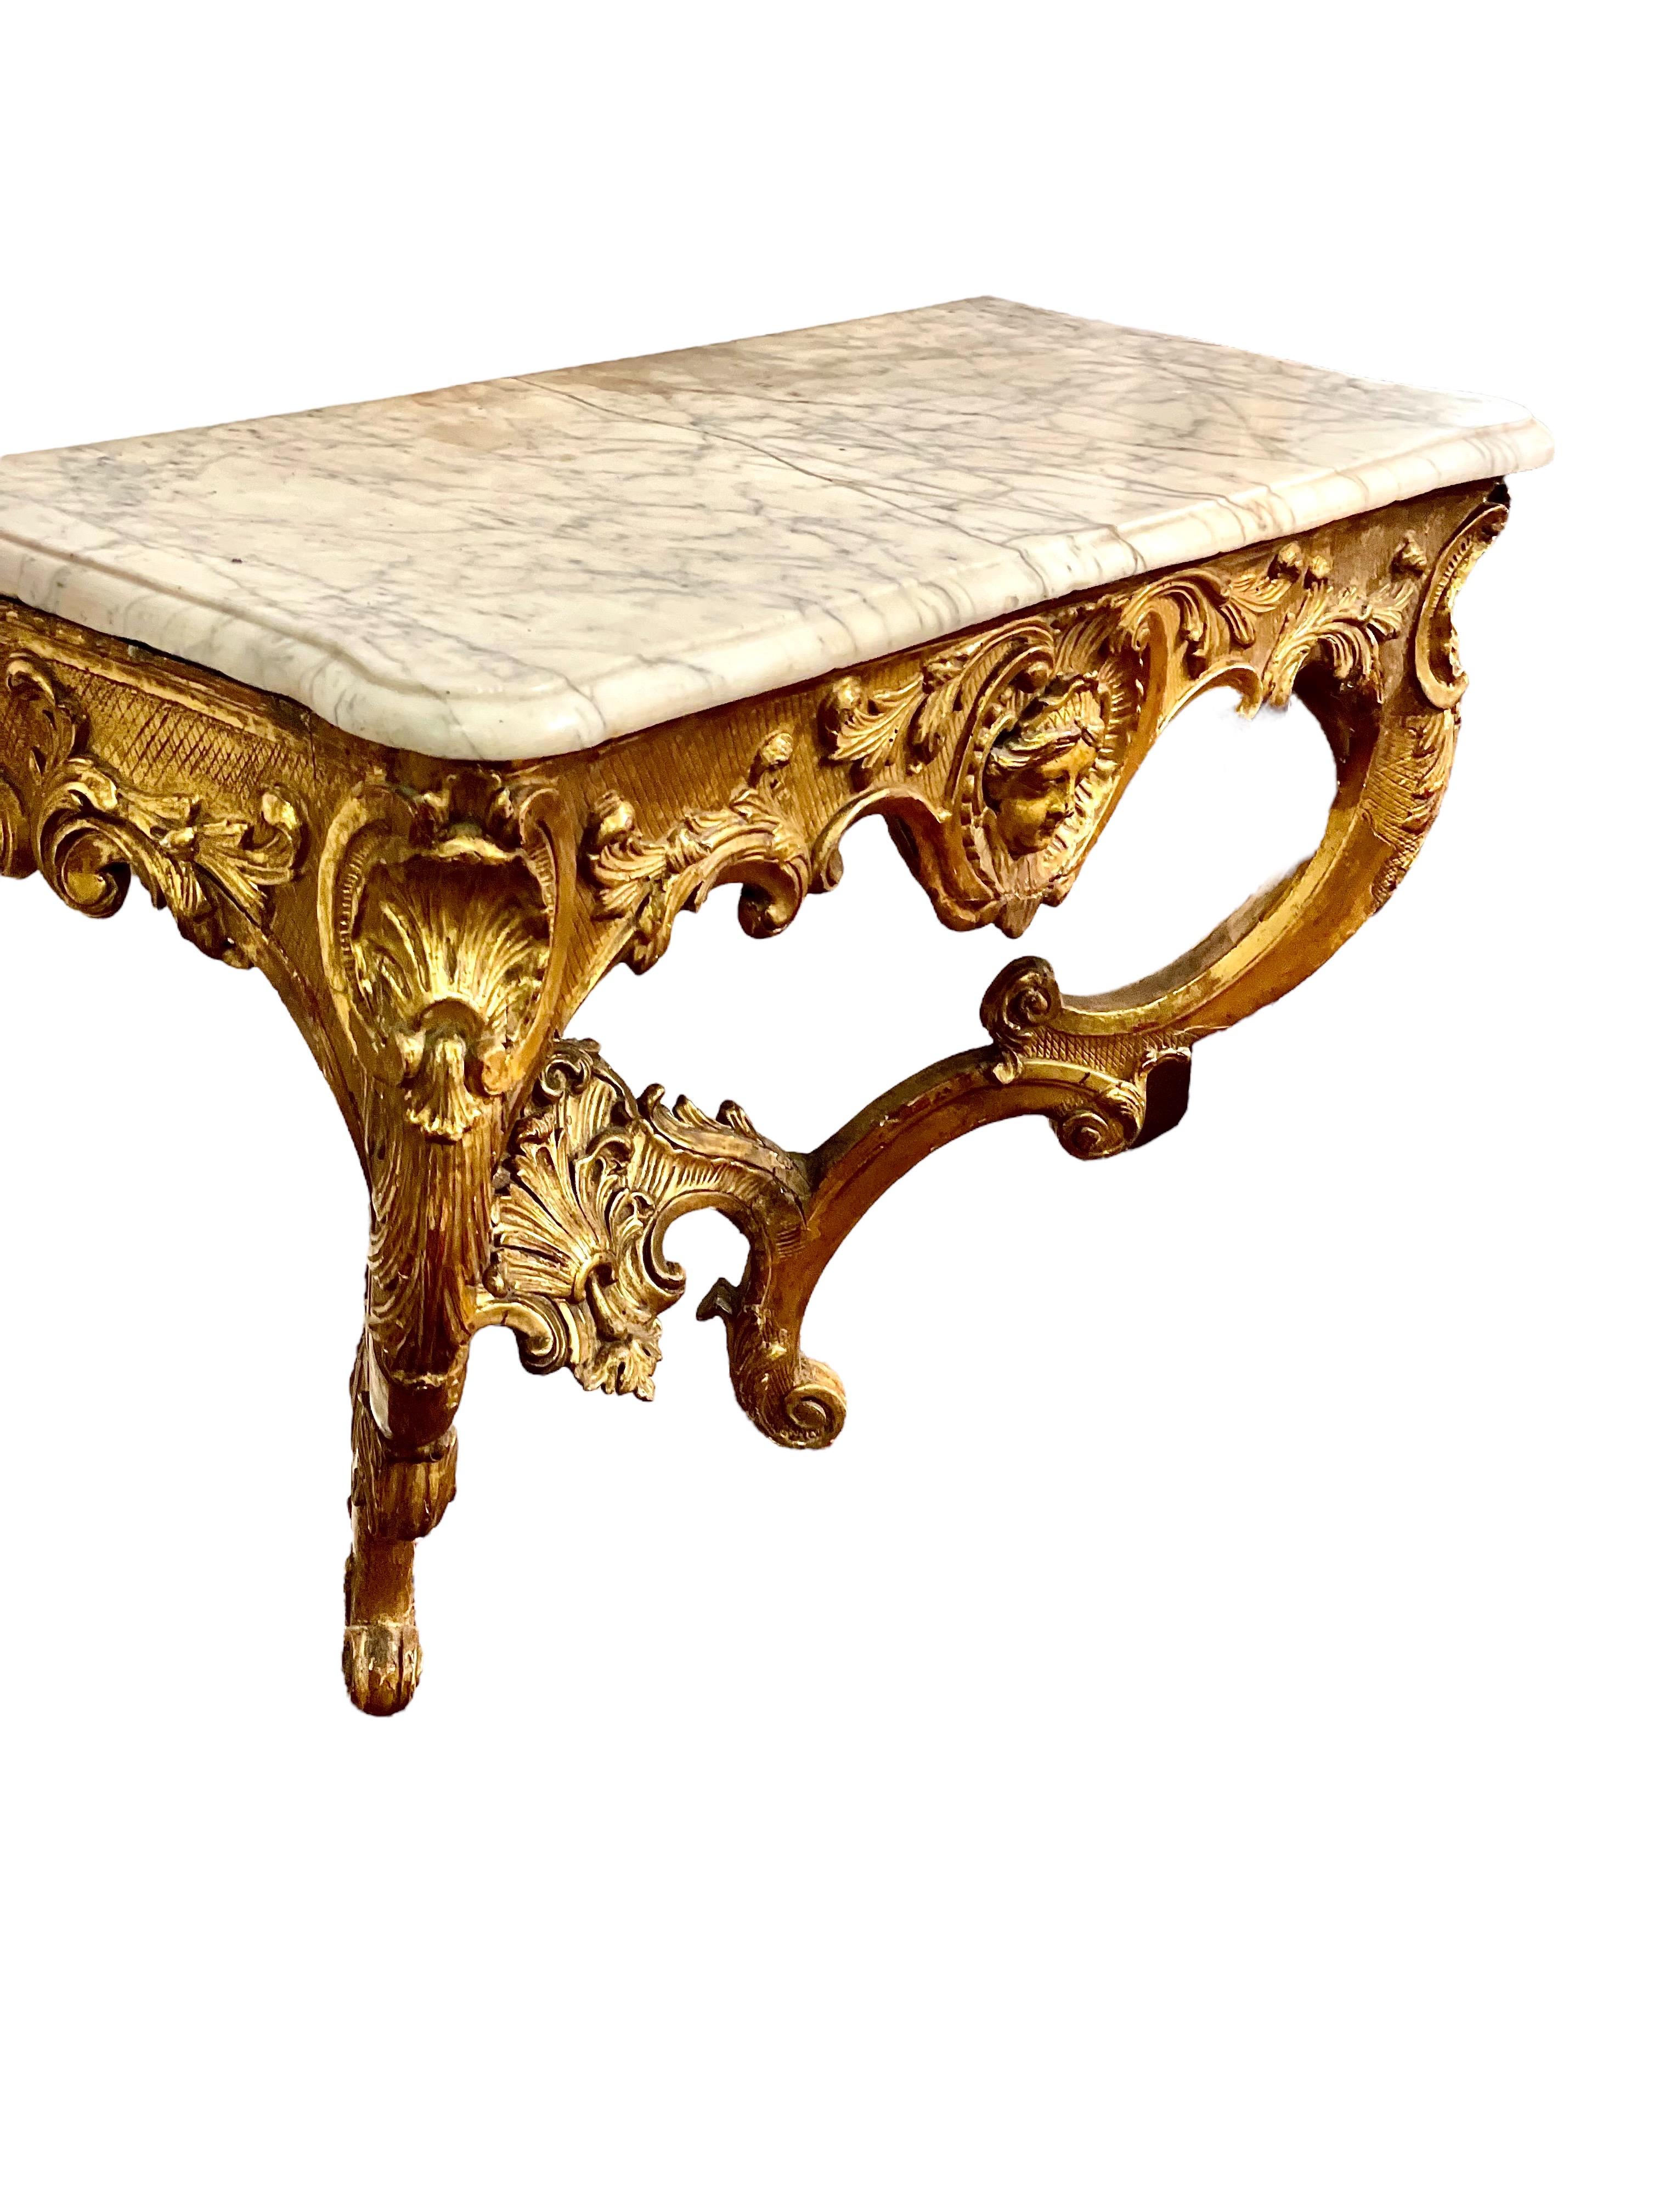 1730s Louis XV Period French Giltwood Console Table  For Sale 3